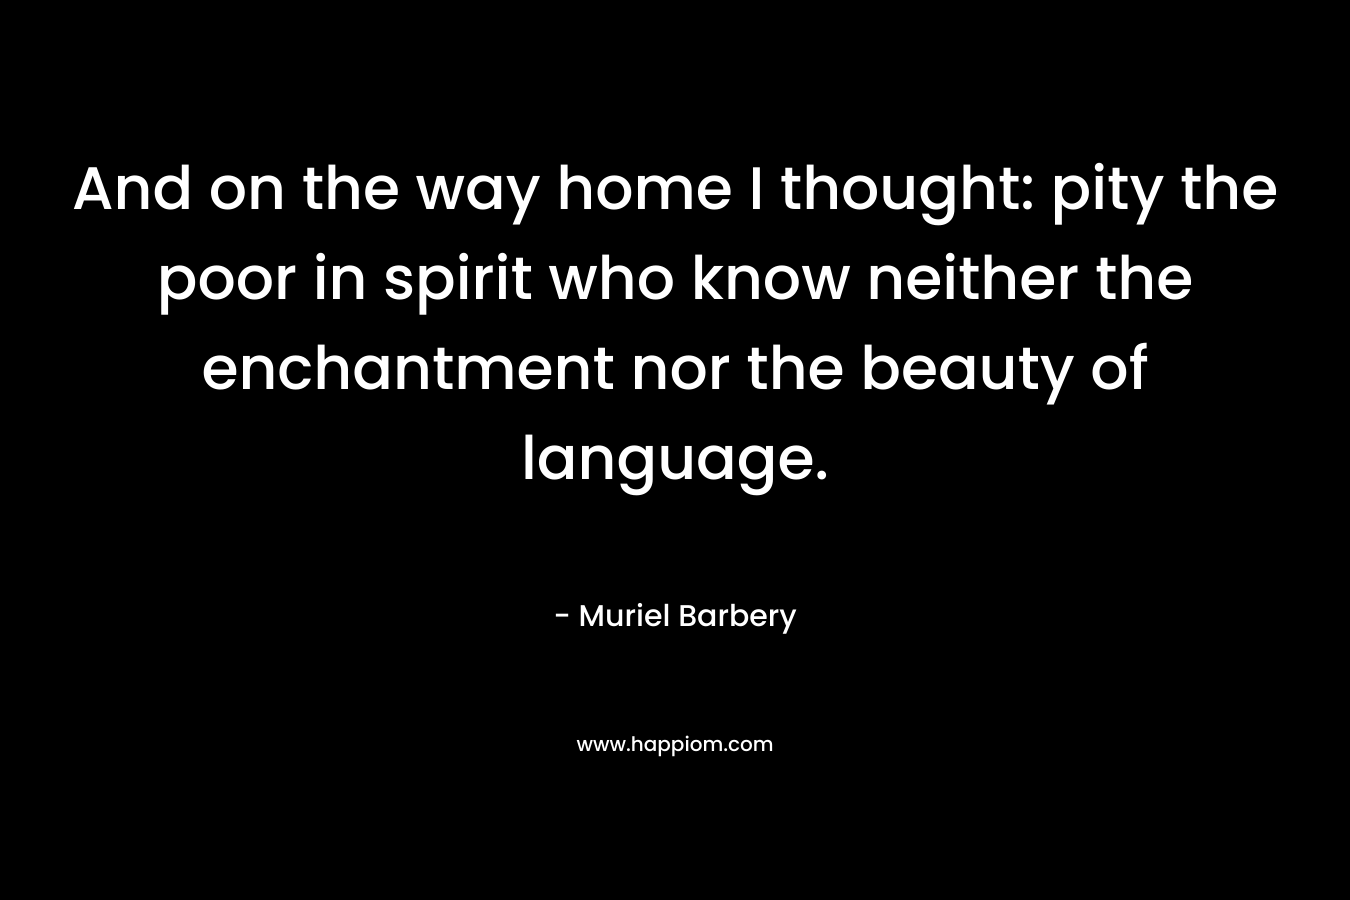 And on the way home I thought: pity the poor in spirit who know neither the enchantment nor the beauty of language. – Muriel Barbery